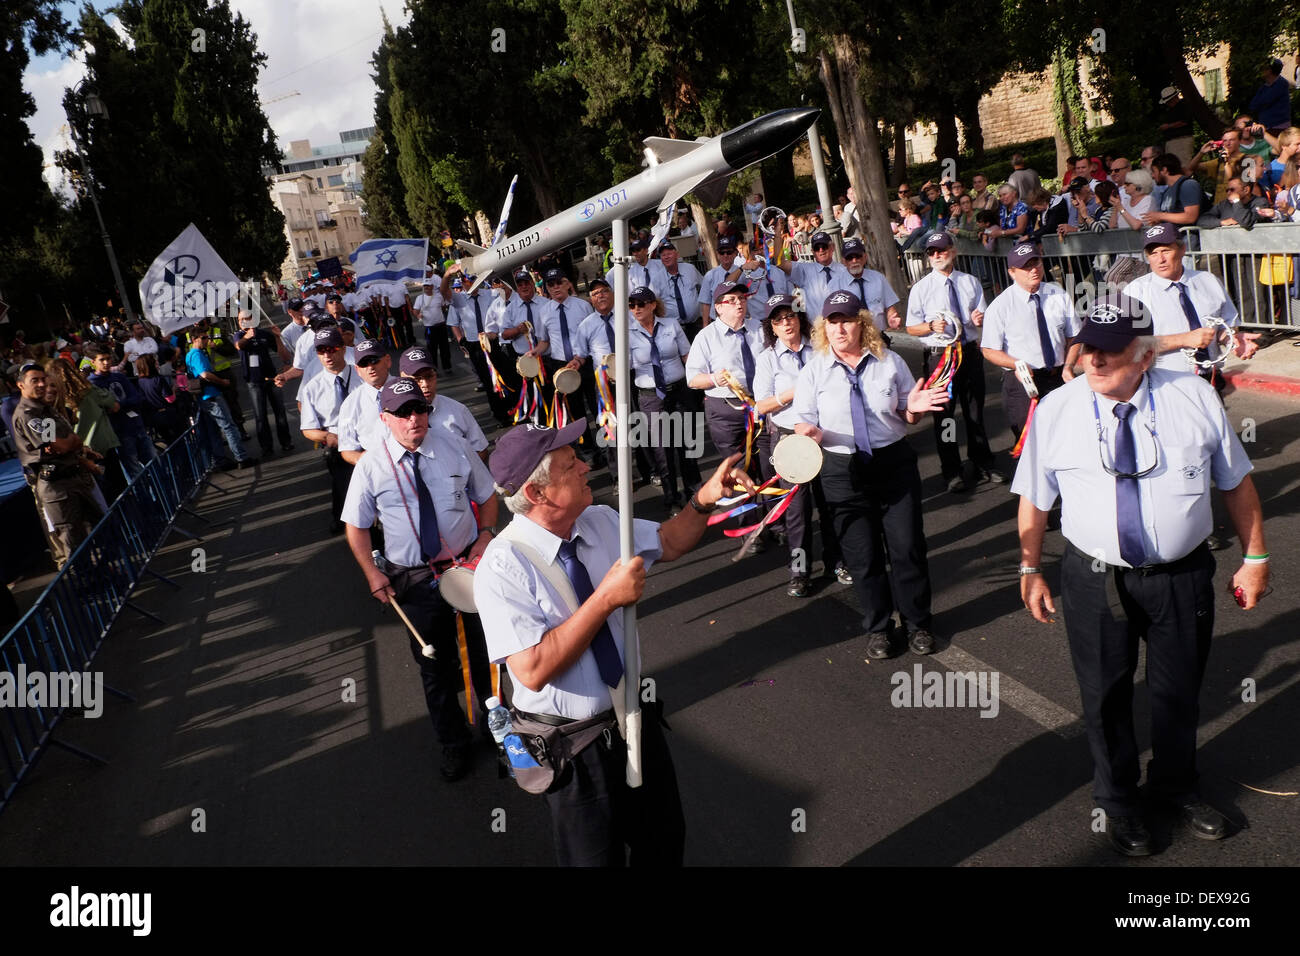 Rafael Israeli defense technology company workers carrying a model of an Israeli missile taking part in the annual Jerusalem March during Sukkot feast of the Tabernacles. The parade is hosted by the International Christian Embassy Jerusalem (ICEJ) and draws thousands of Christians from around the world in support of Israel. Stock Photo